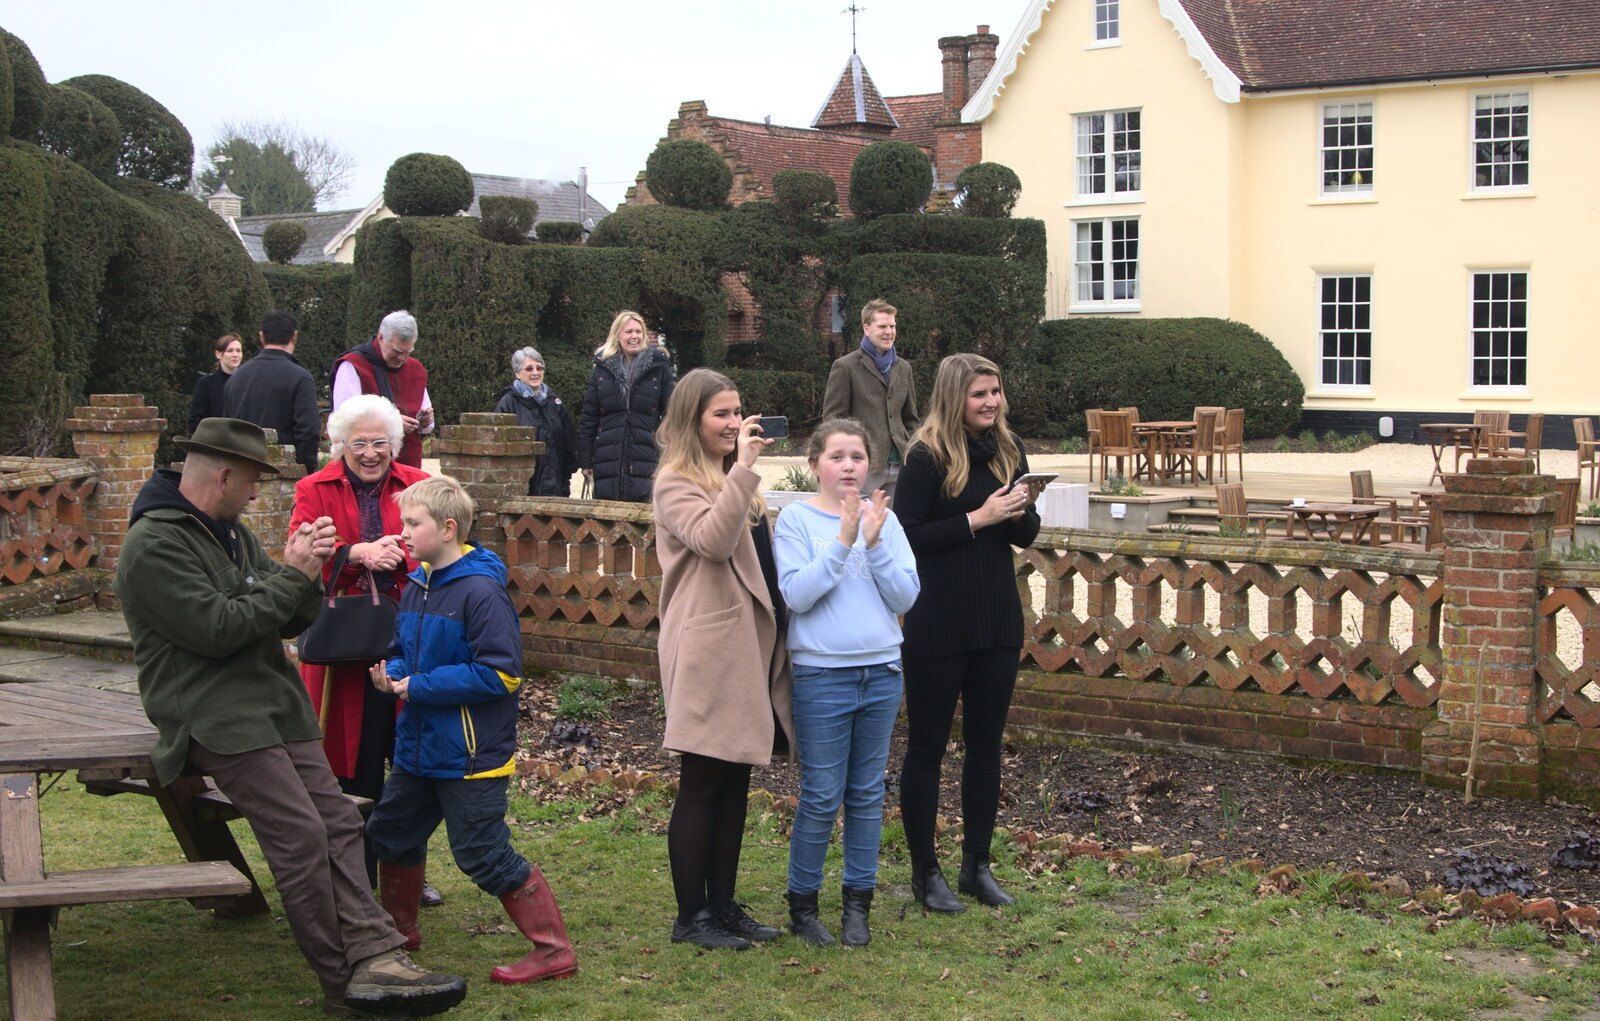 A small crowd watches the unveiling from The Launching of the Jolly Conkerer, The Oaksmere, Brome, Suffolk - 3rd April 2015